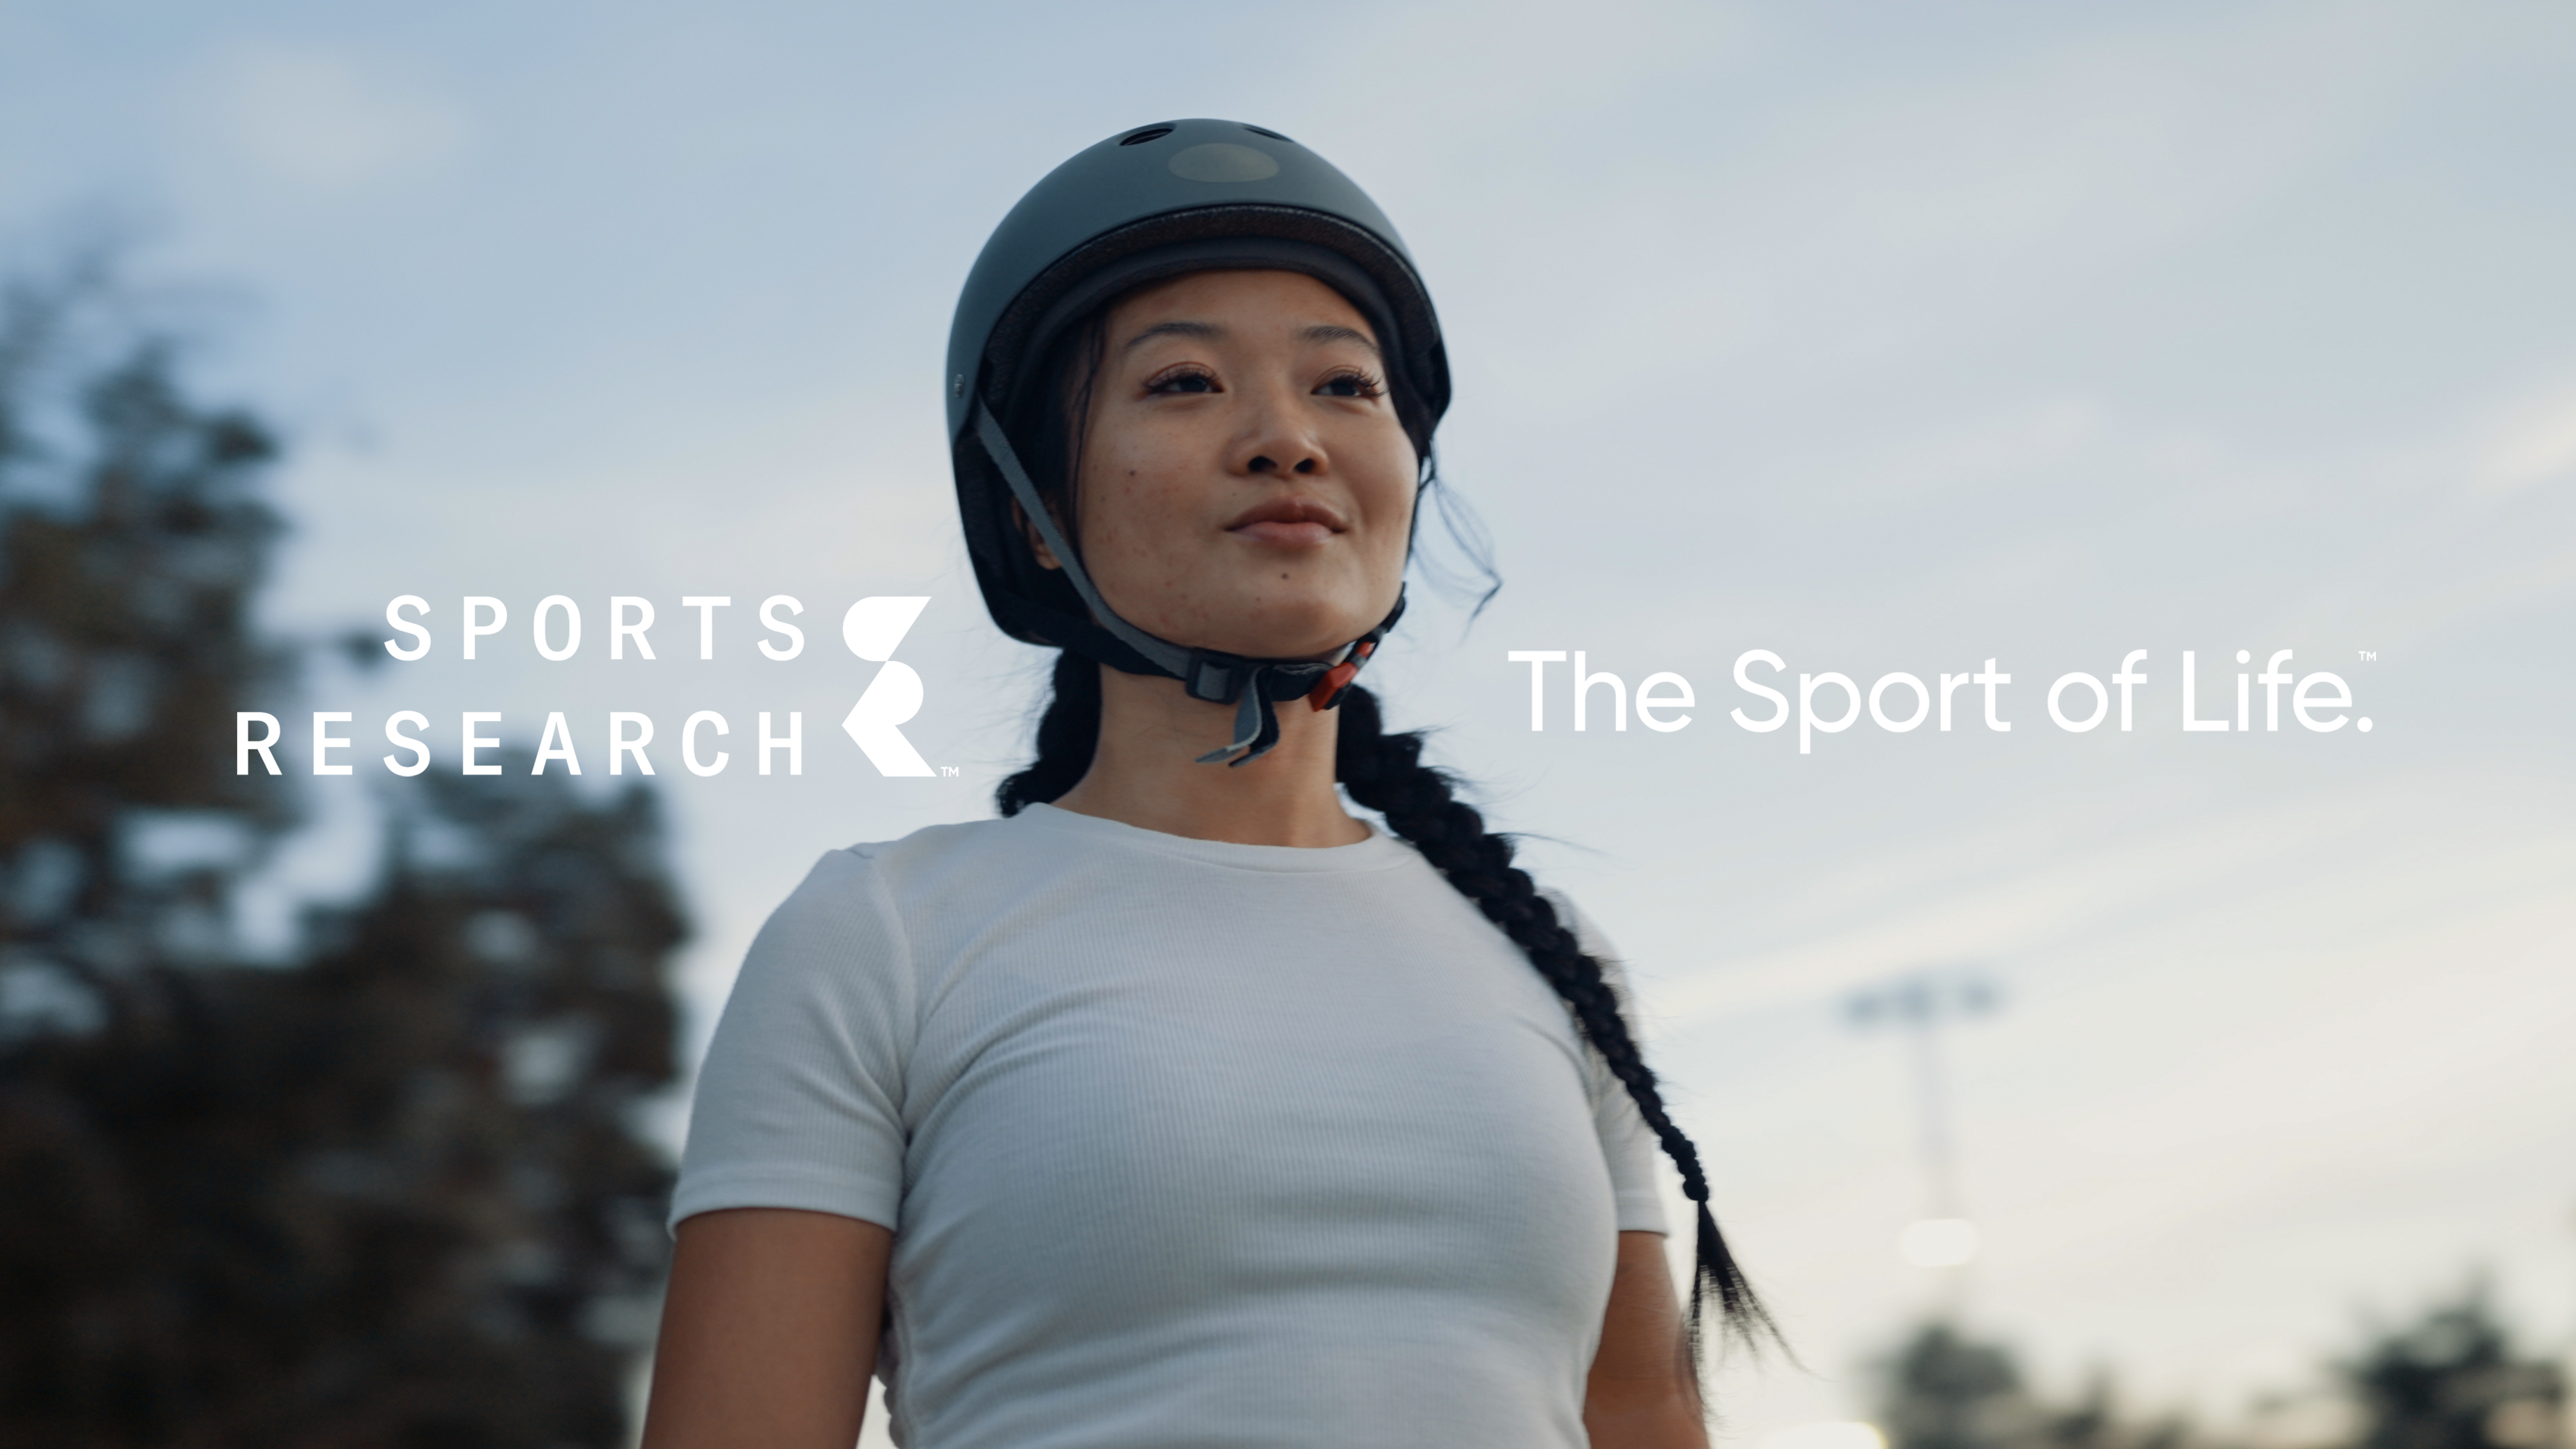 Sports Research Launches Inspirational “The Sport of Life” Campaign  Expanding Rebrand Initiative